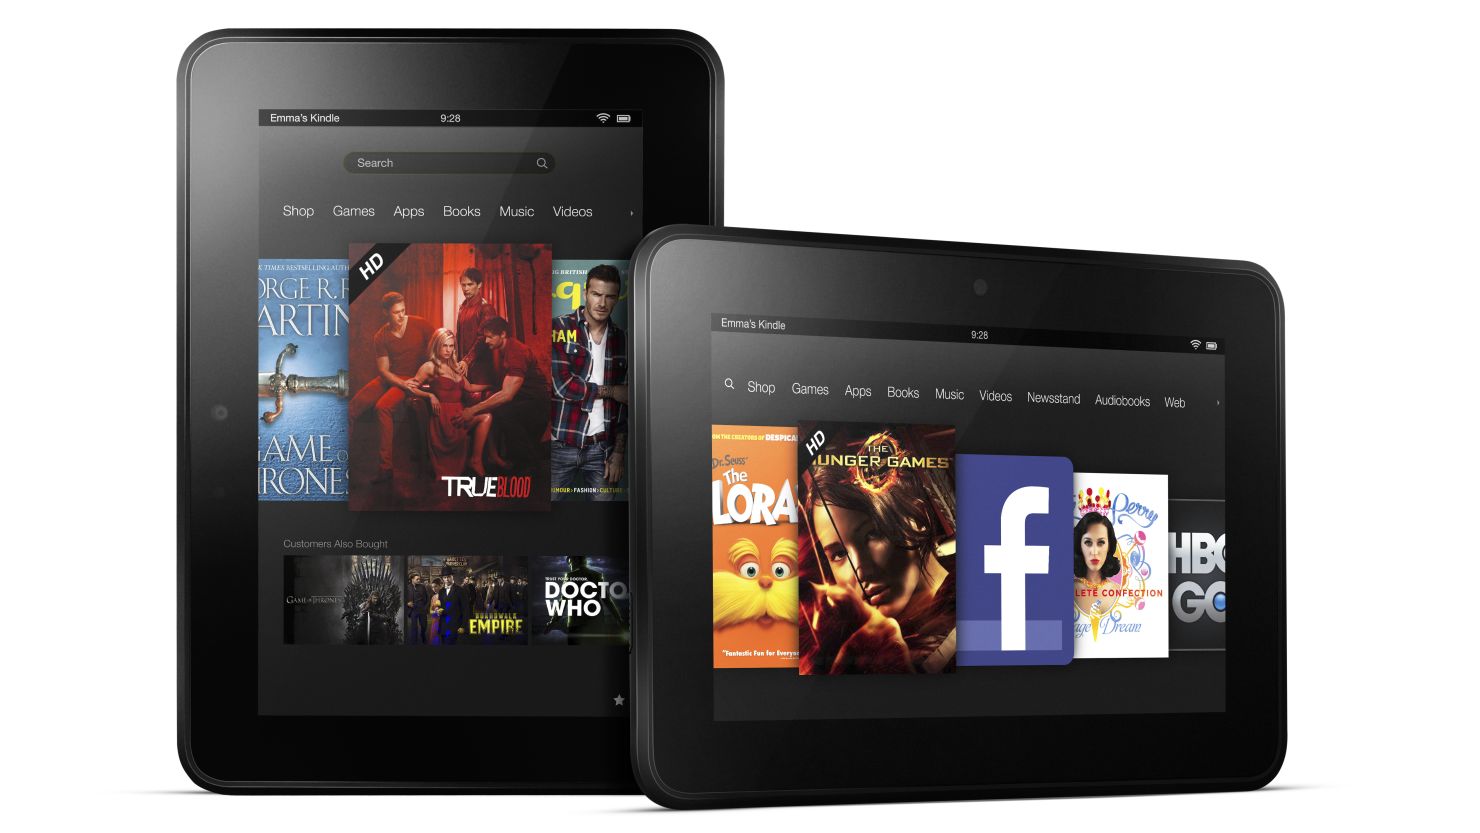 Amazon's new 7-inch Kindle Fire HD will cost $199 and ship September 14. A bigger, 8.9-inch version, ships in November.